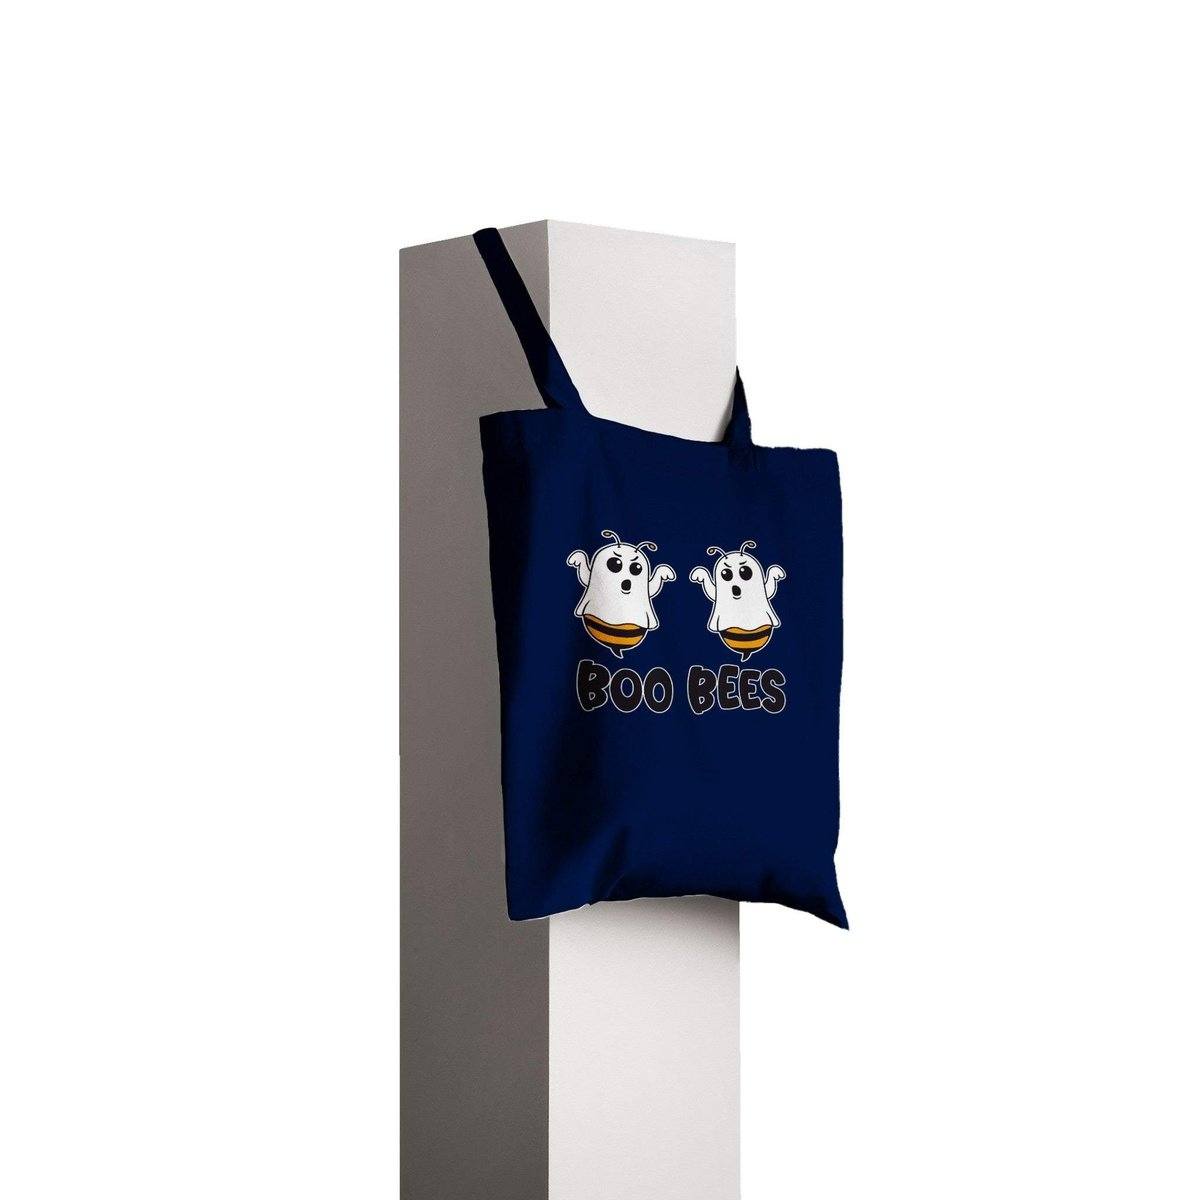 Boo Bees Tote Bag - Classic Tote Bag Australia Online Color Navy